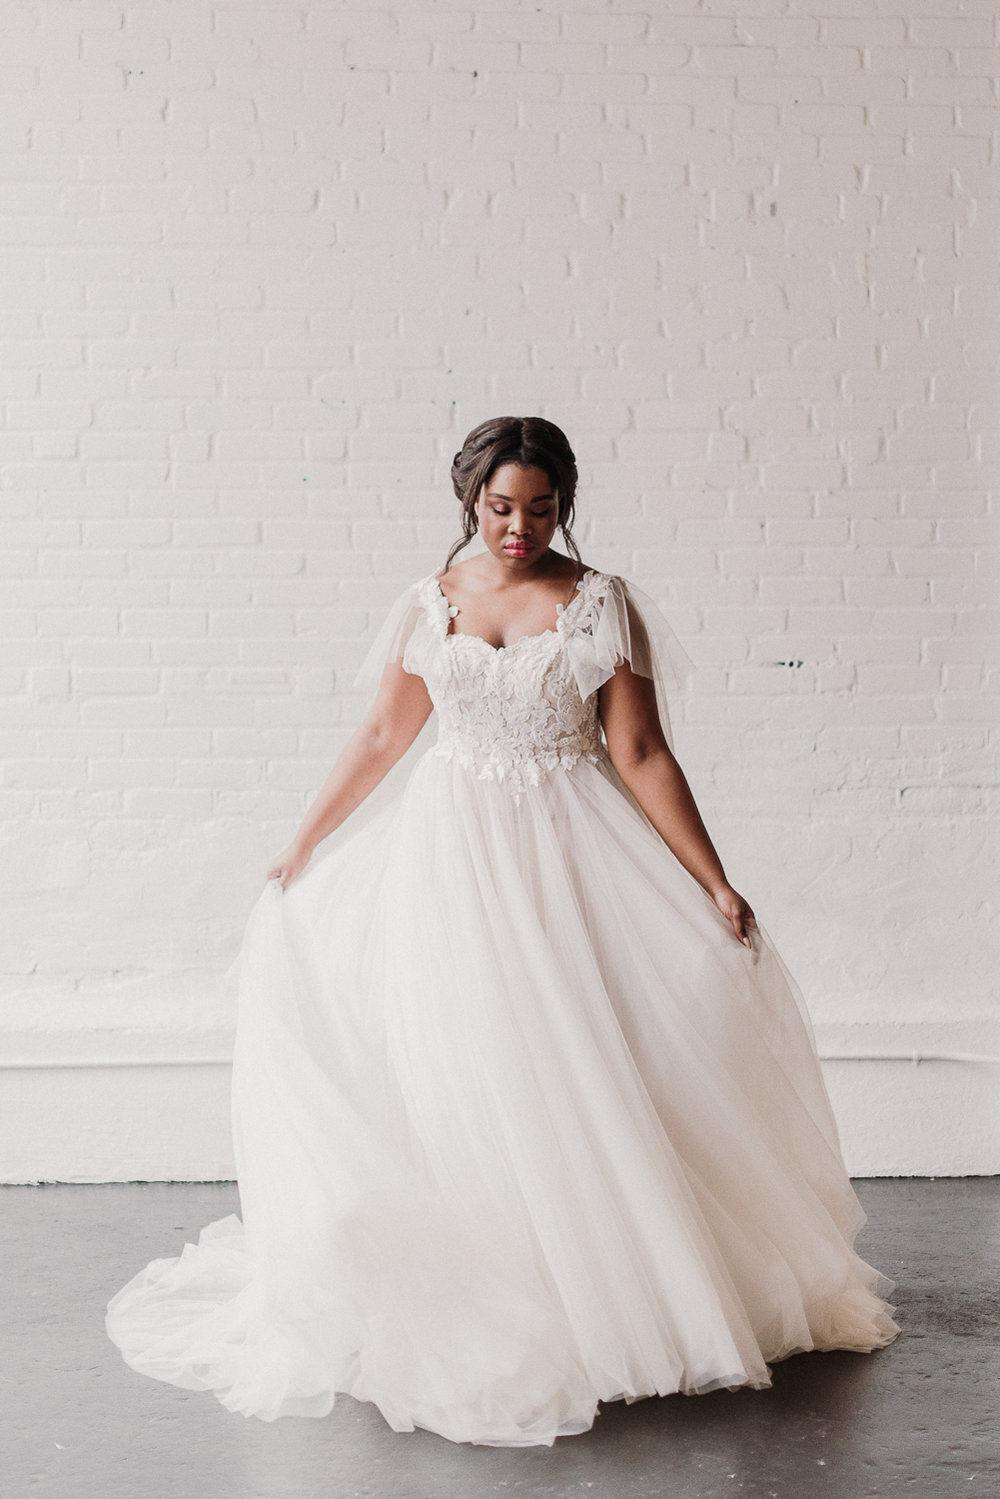 Our Cottagecore Wedding Dresses & Bridal Accessories For Under $1,200